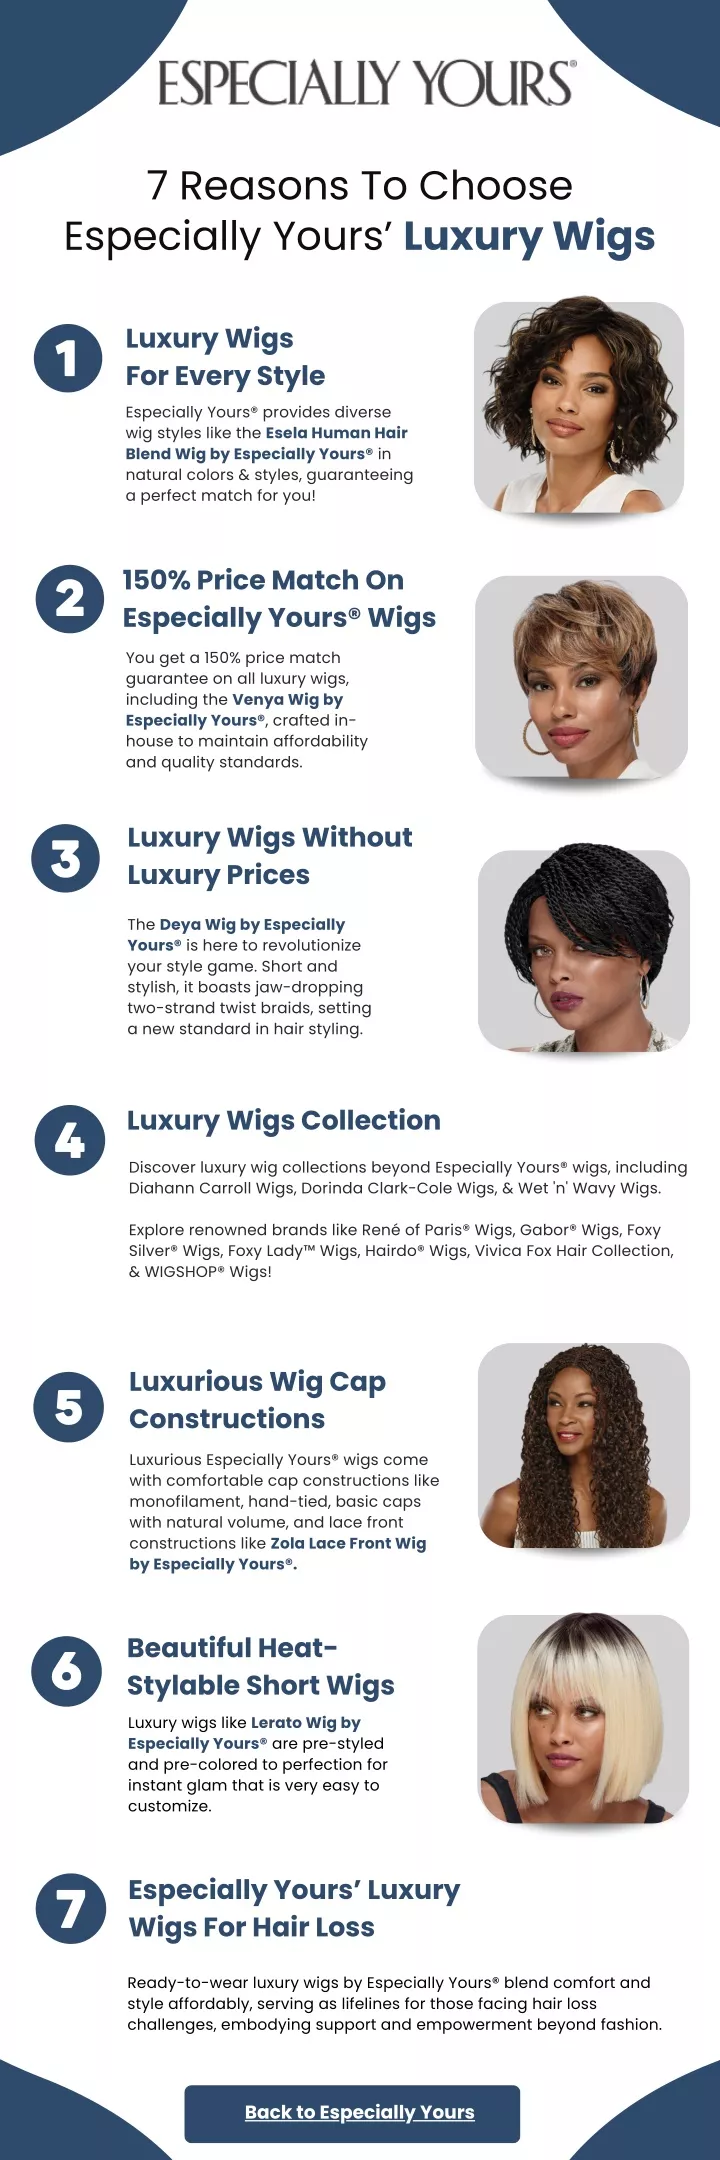 7 reasons to choose especially yours luxury wigs